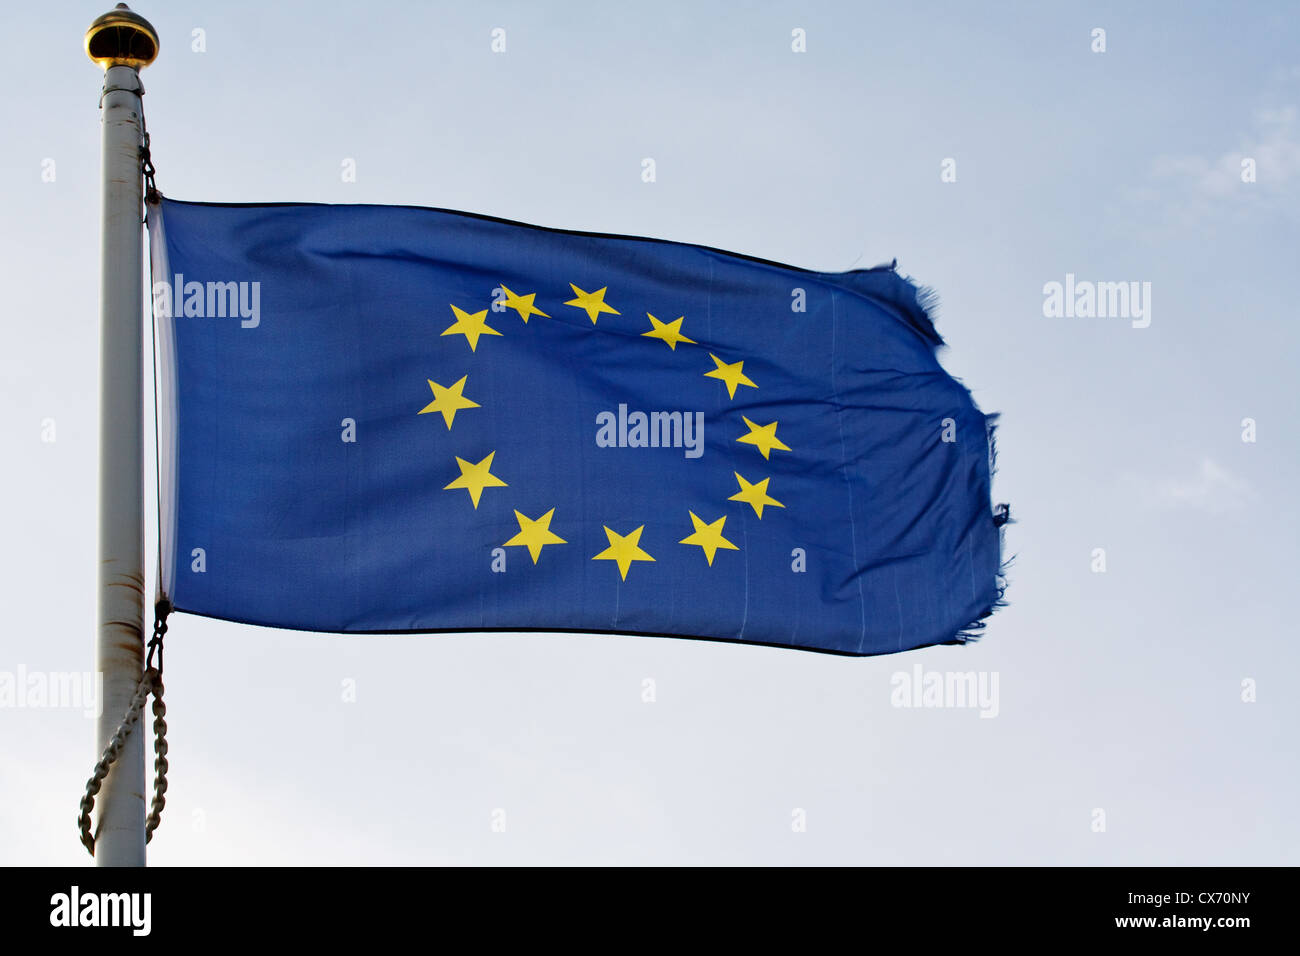 The European union flag of europe ripples in the wind on flagpole Stock Photo